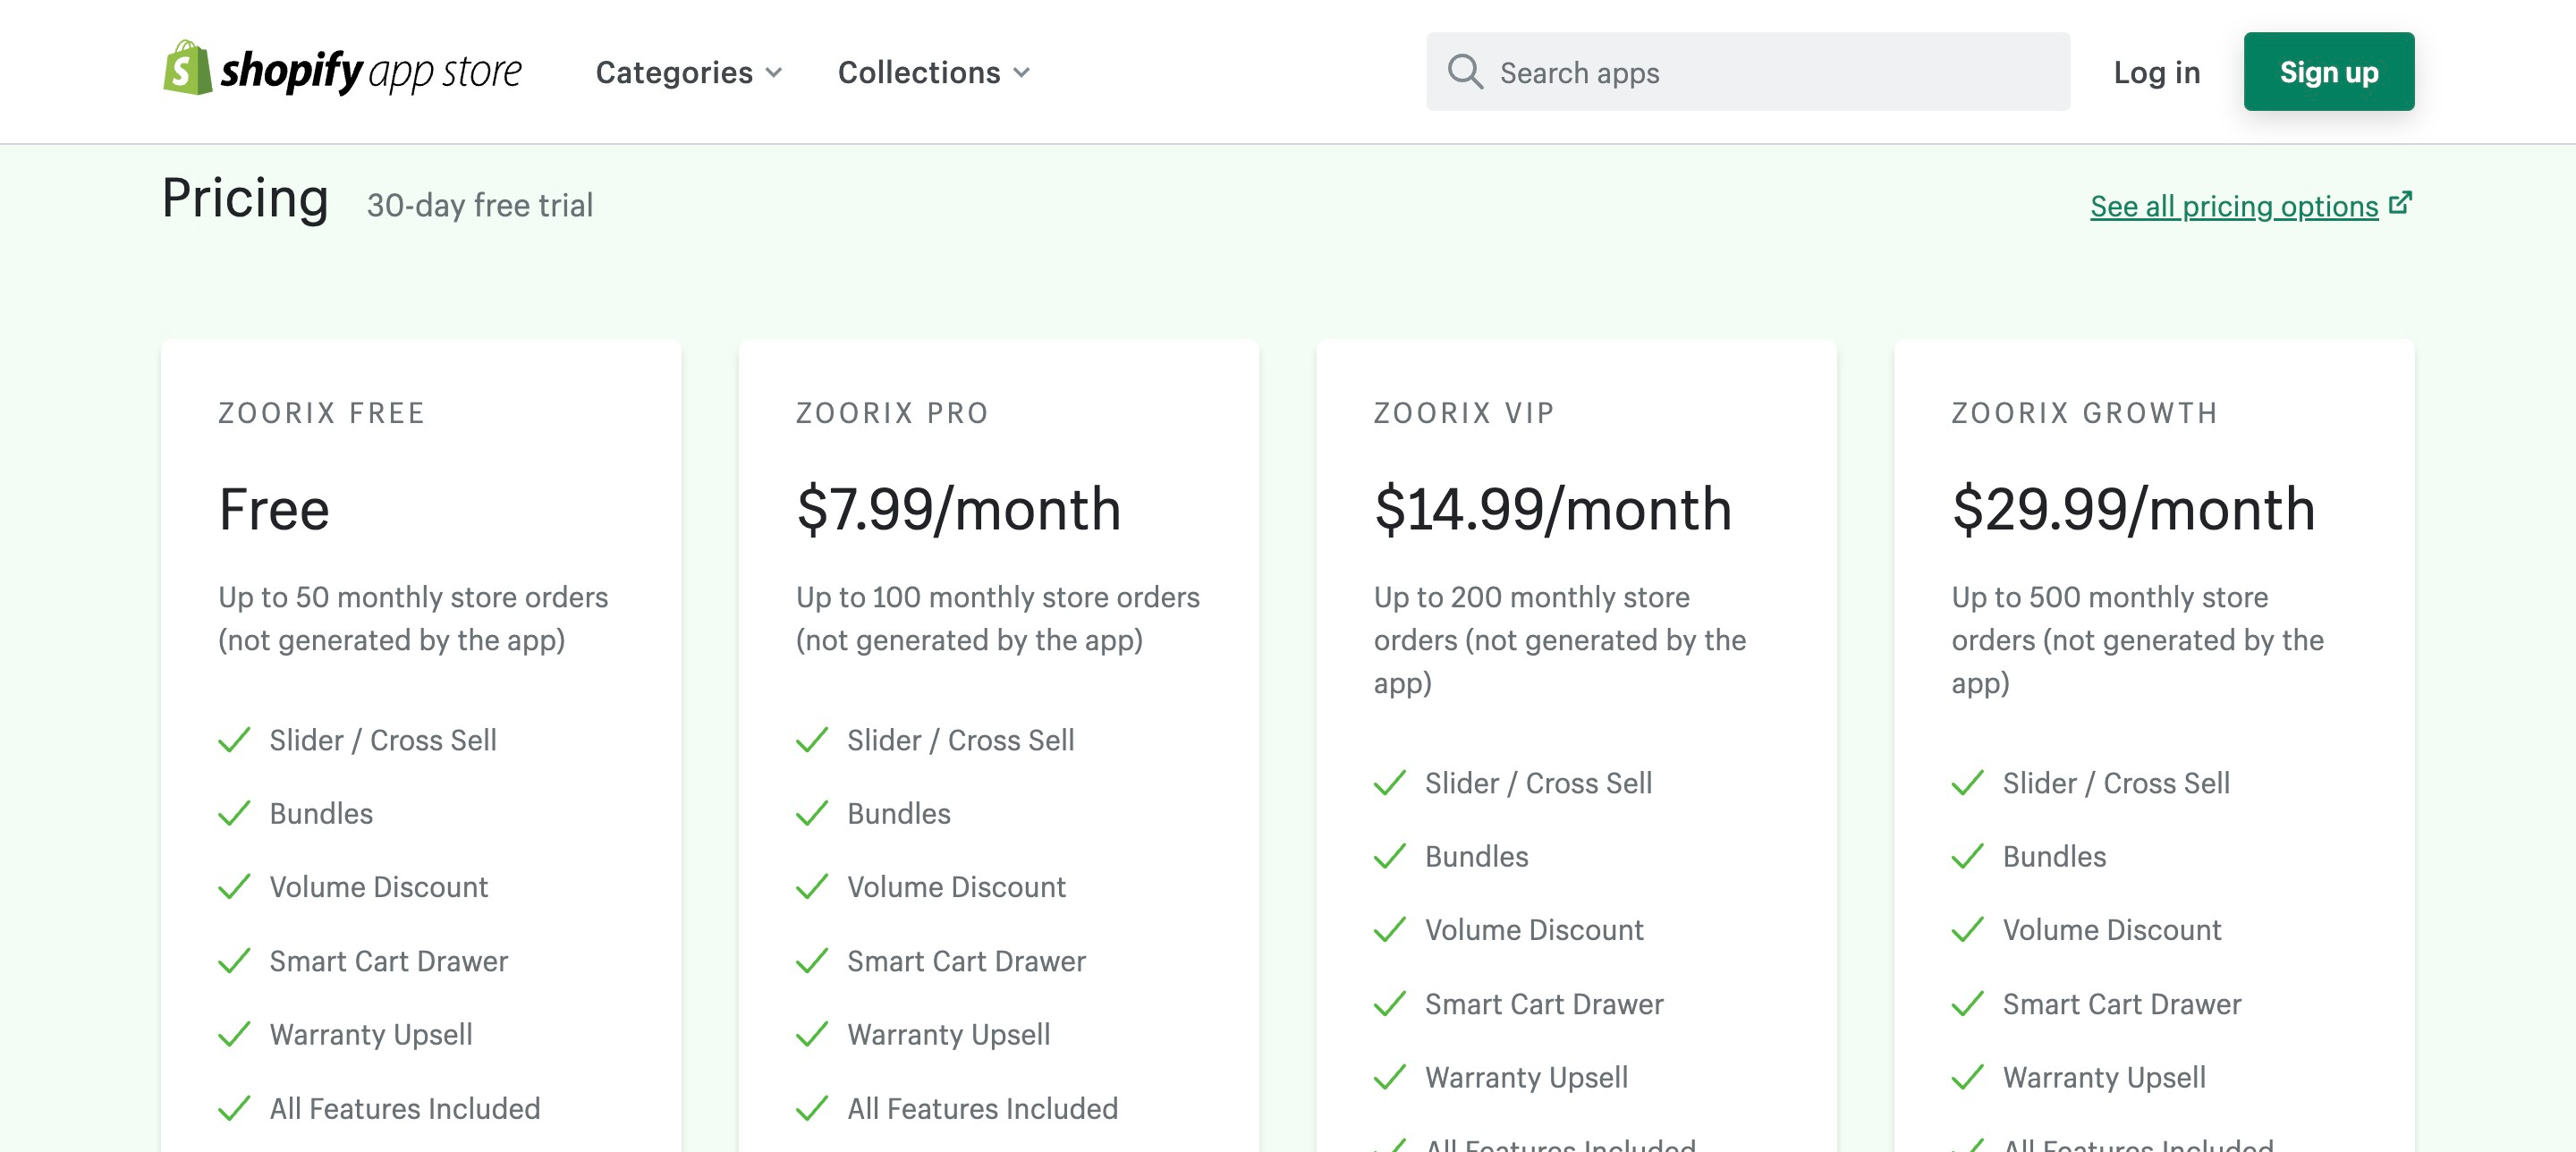 Pricing features of Zoorix: